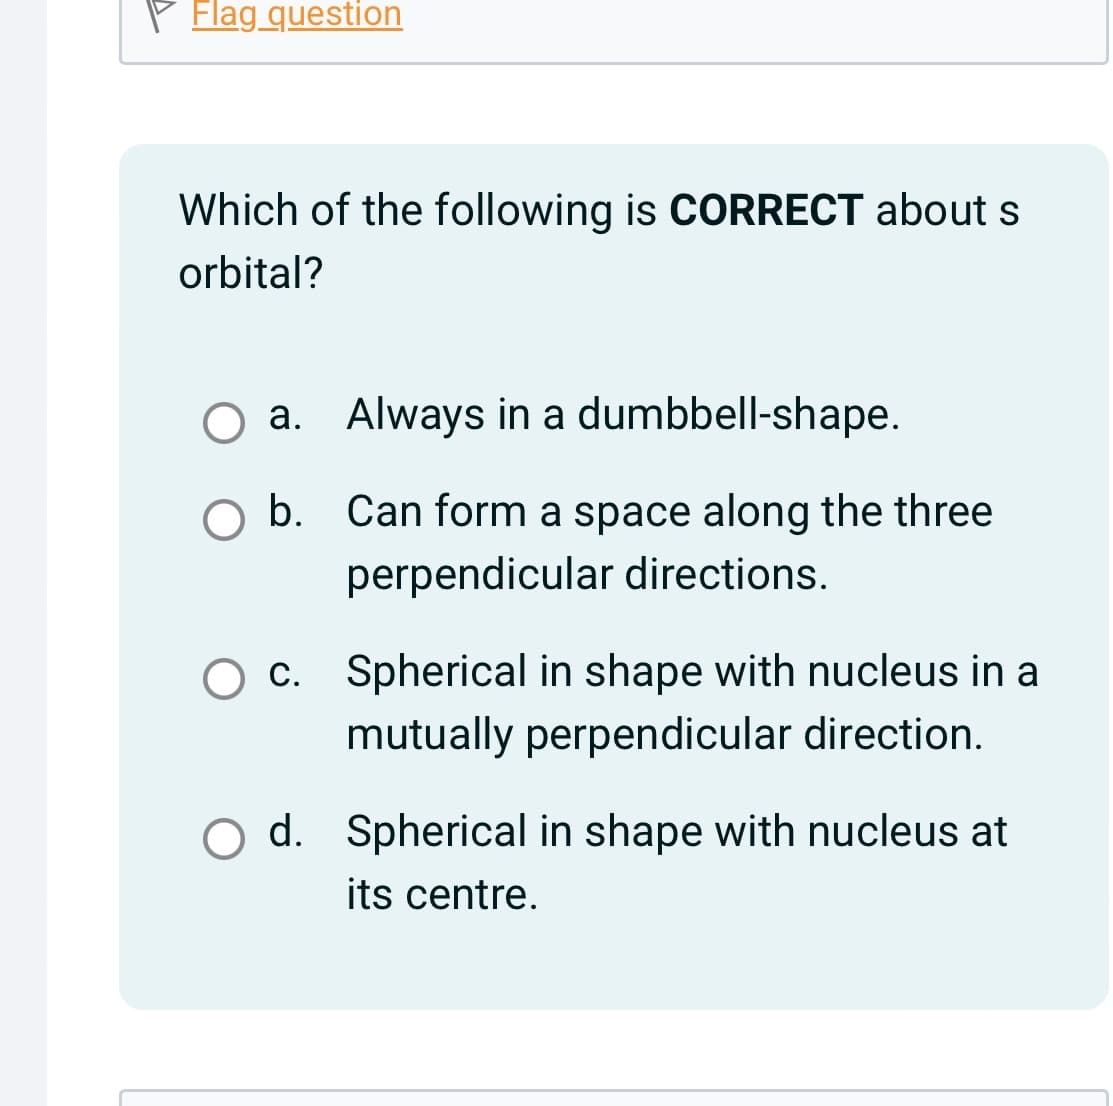 Flag question
Which of the following is CORRECT about s
orbital?
a. Always in a dumbbell-shape.
b. Can form a space along the three
perpendicular directions.
c. Spherical in shape with nucleus in a
mutually perpendicular direction.
d. Spherical in shape with nucleus at
its centre.